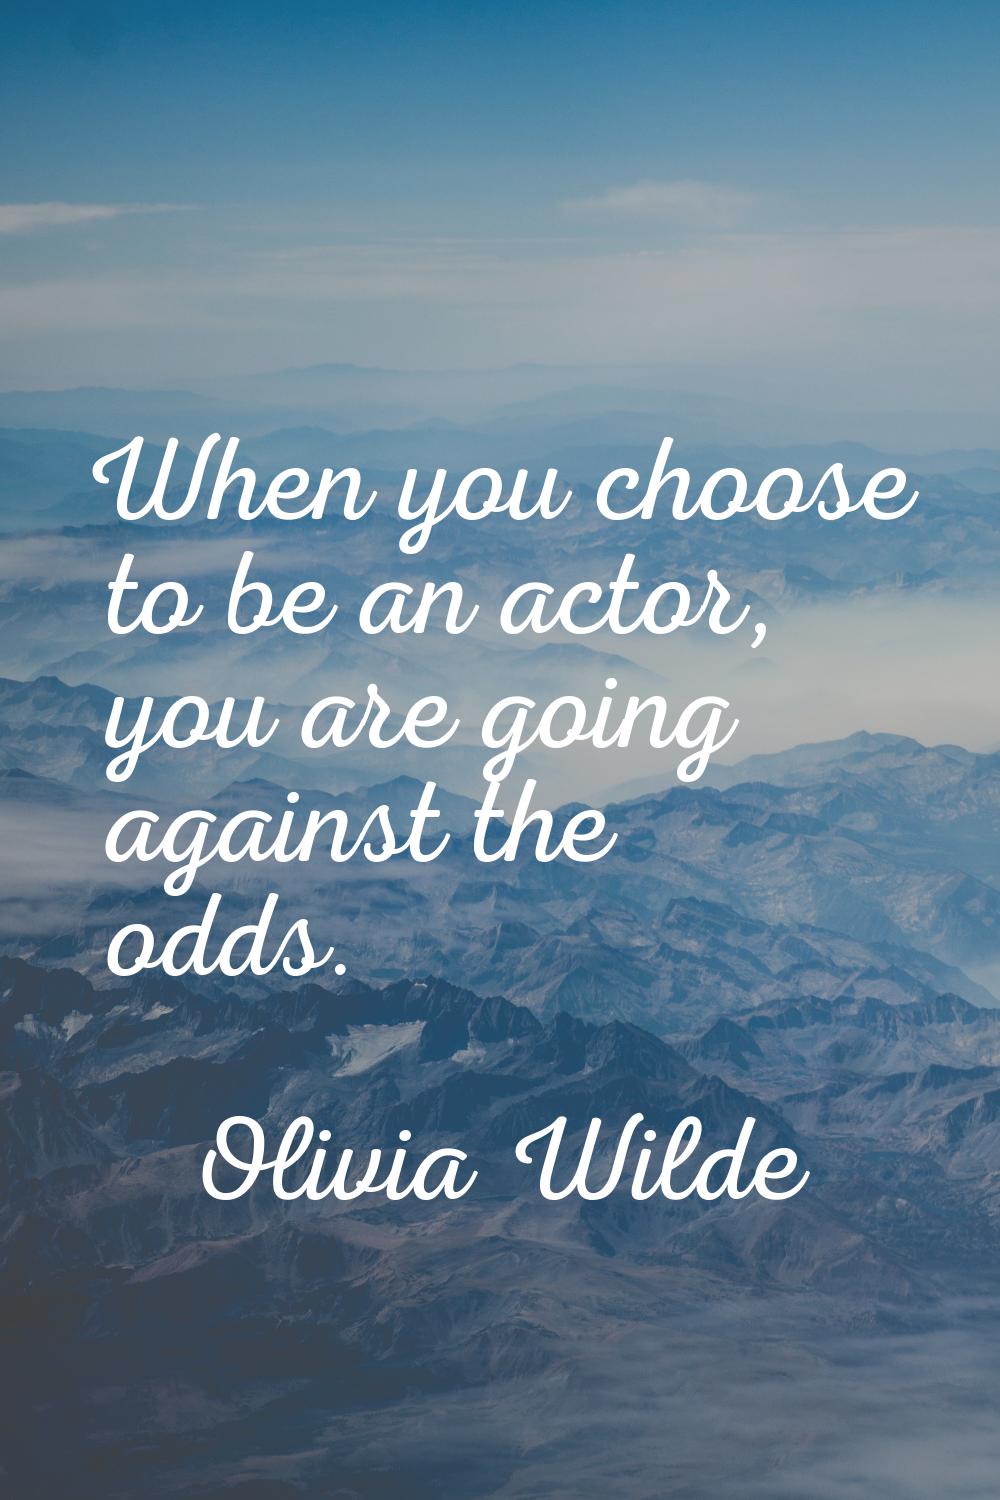 When you choose to be an actor, you are going against the odds.